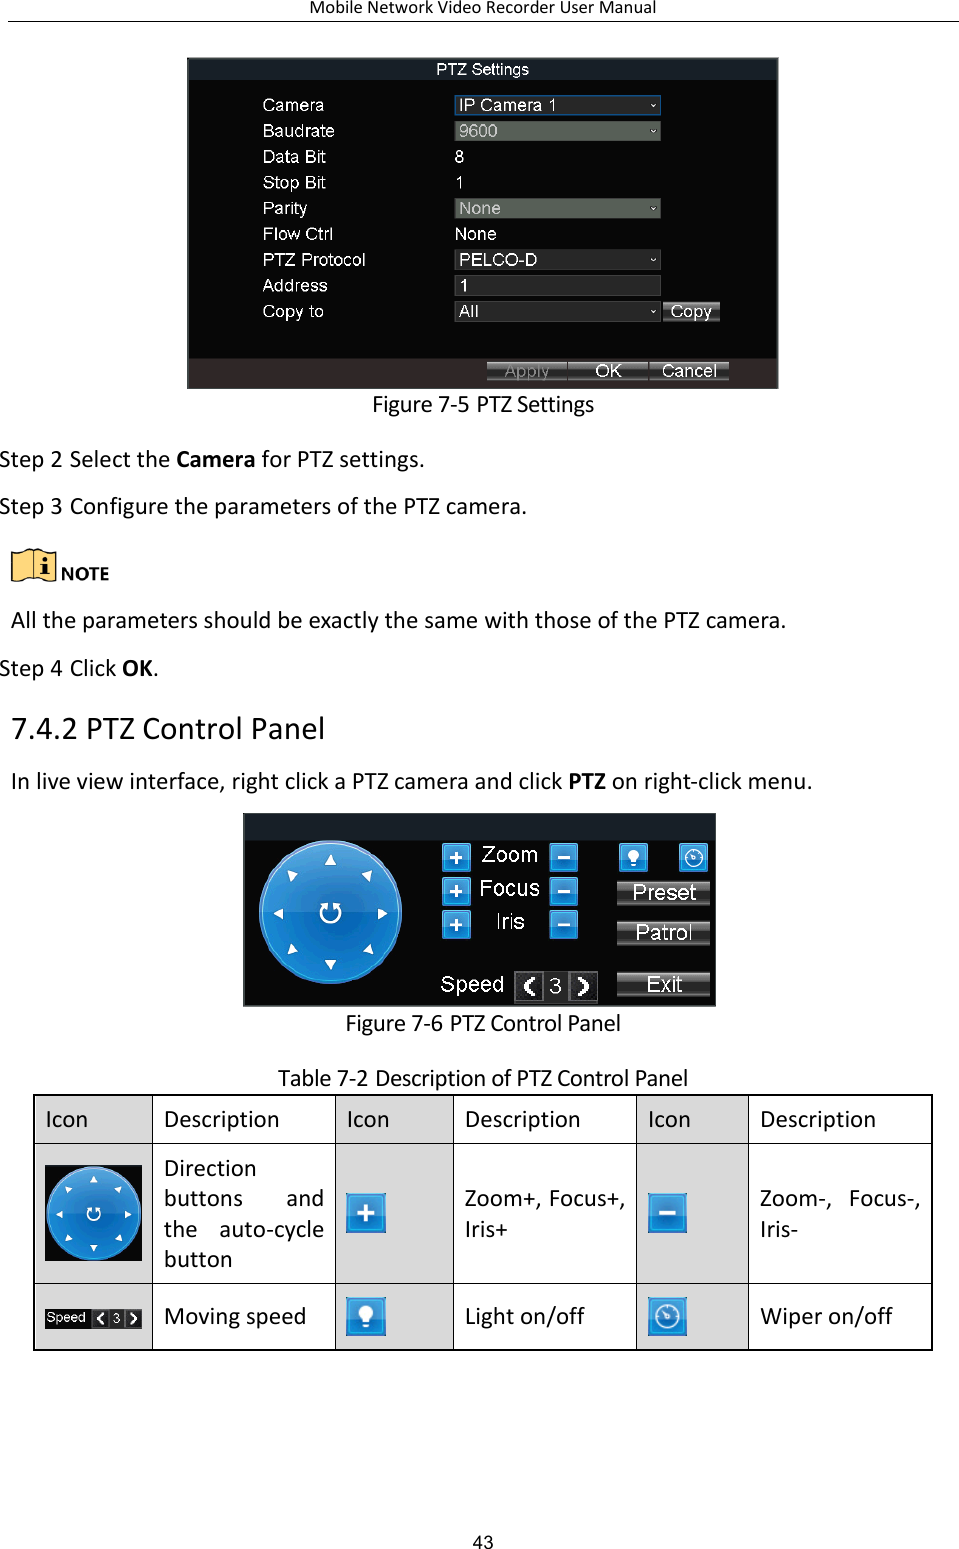 Mobile Network Video Recorder User Manual 43  Figure 7-5 PTZ Settings Step 2 Select the Camera for PTZ settings. Step 3 Configure the parameters of the PTZ camera.   All the parameters should be exactly the same with those of the PTZ camera. Step 4 Click OK. 7.4.2 PTZ Control Panel In live view interface, right click a PTZ camera and click PTZ on right-click menu.  Figure 7-6 PTZ Control Panel Table 7-2 Description of PTZ Control Panel  Icon Description Icon Description Icon Description  Direction buttons  and the  auto-cycle button  Zoom+, Focus+, Iris+  Zoom-,  Focus-, Iris-  Moving speed  Light on/off  Wiper on/off 